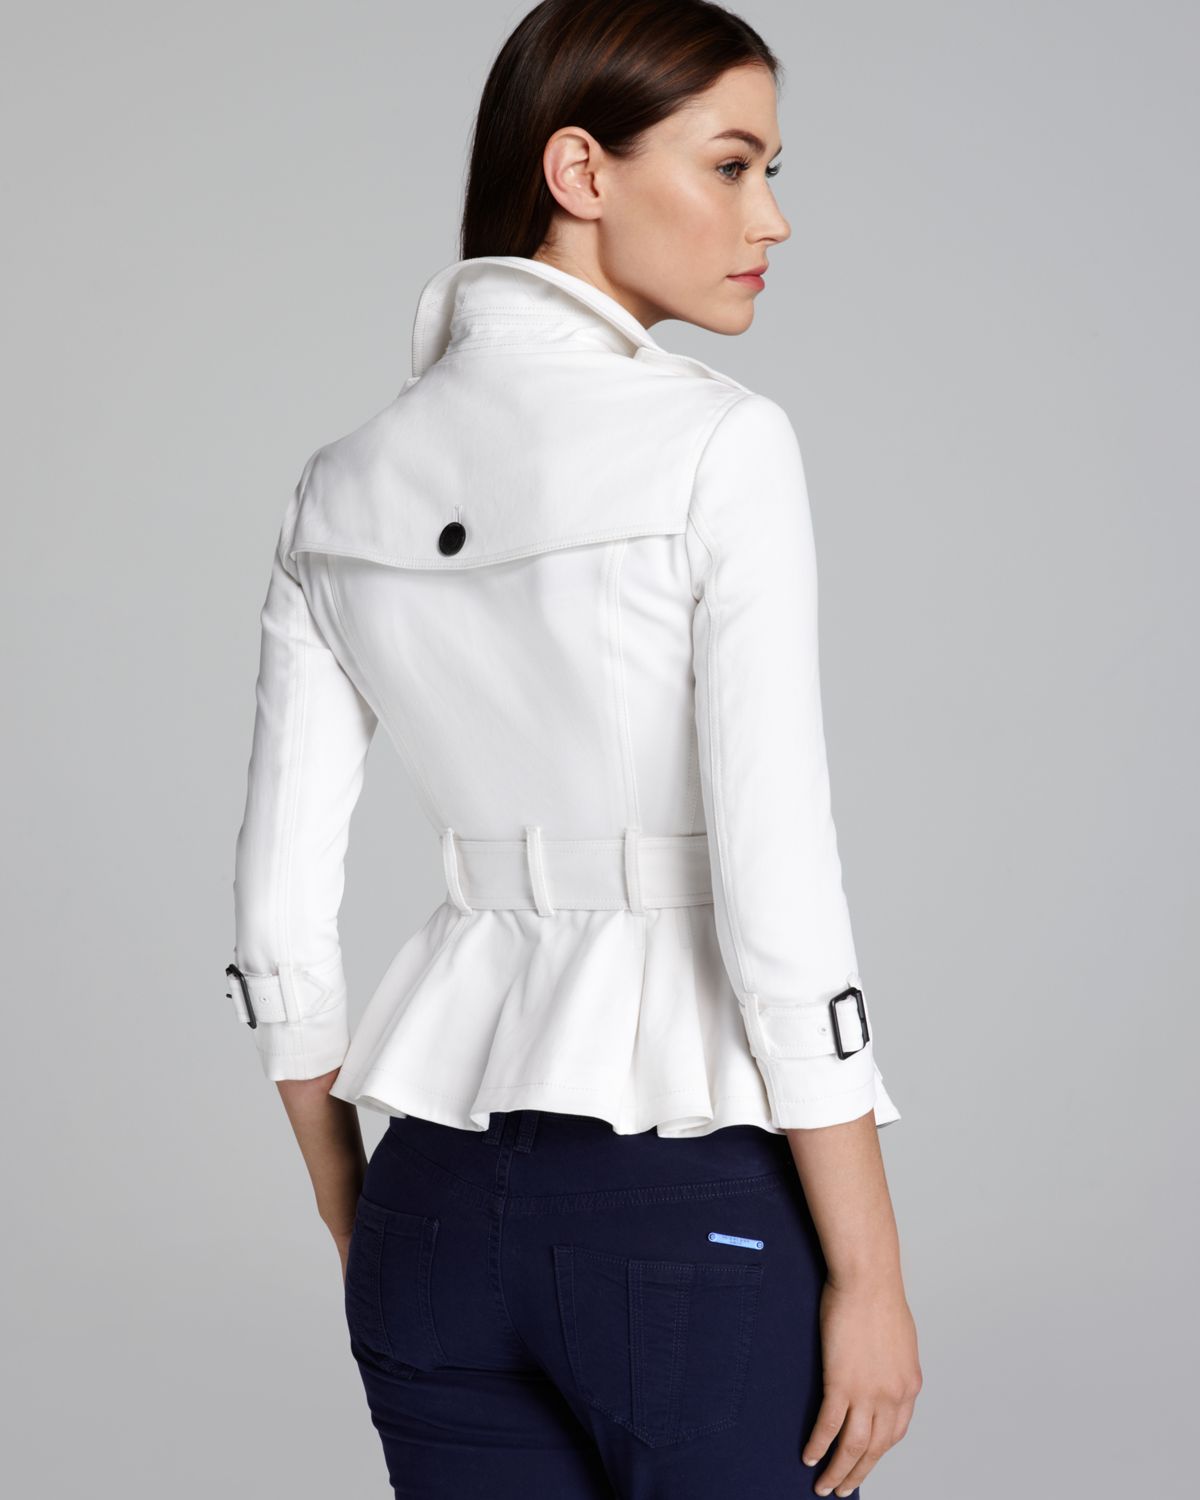 Burberry Brit Shenstone Cropped Trench Coat with Belt in White (Gray) - Lyst